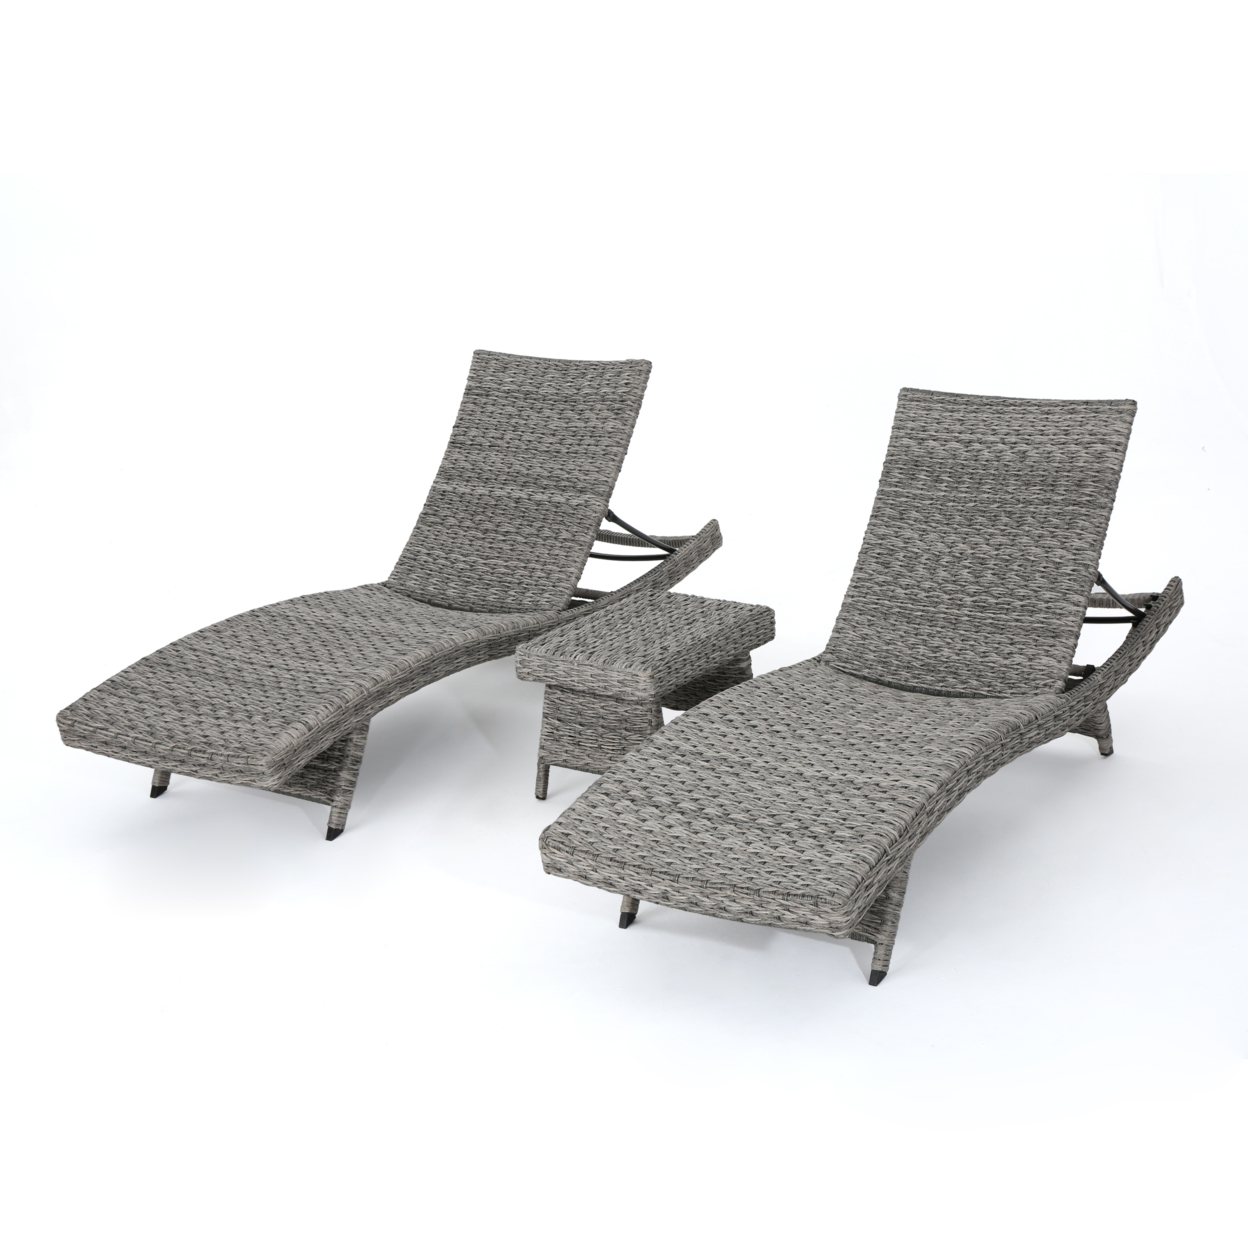 Knightley Outdoor 3 Piece Gray Wicker Armless Chaise Lounges With Side Table - Foldable Table, Gray